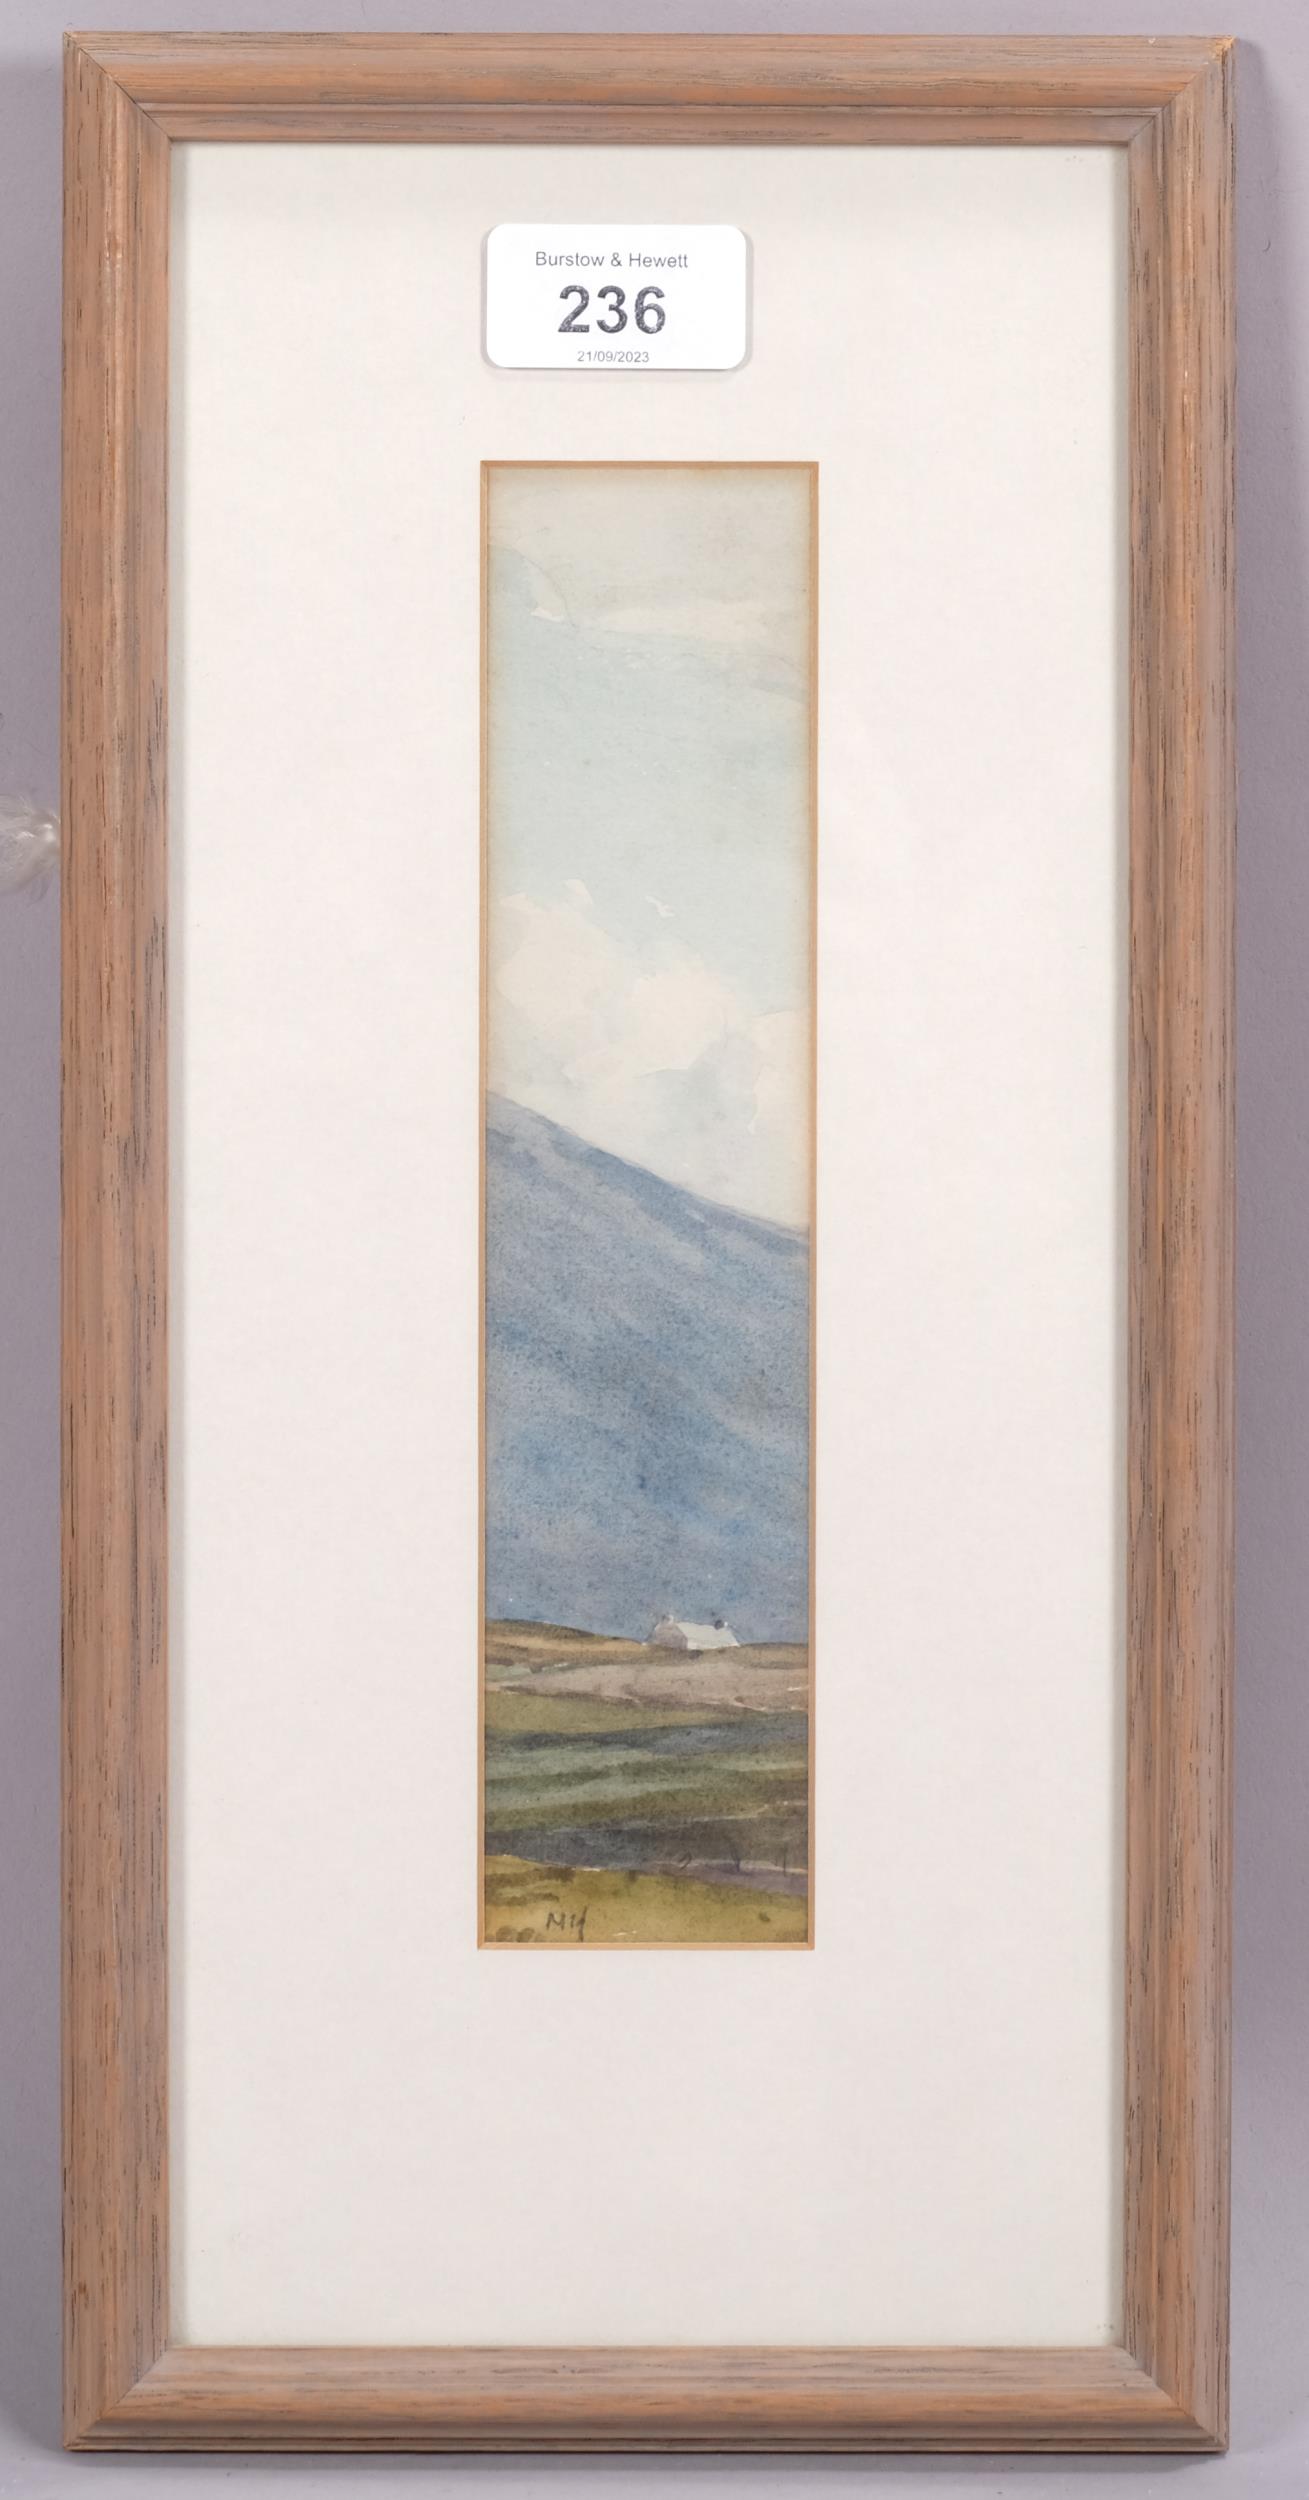 Martin Hardie (1875 - 1952), in the hills, watercolour, signed with initials, 22cm x 5cm, framed - Image 2 of 4